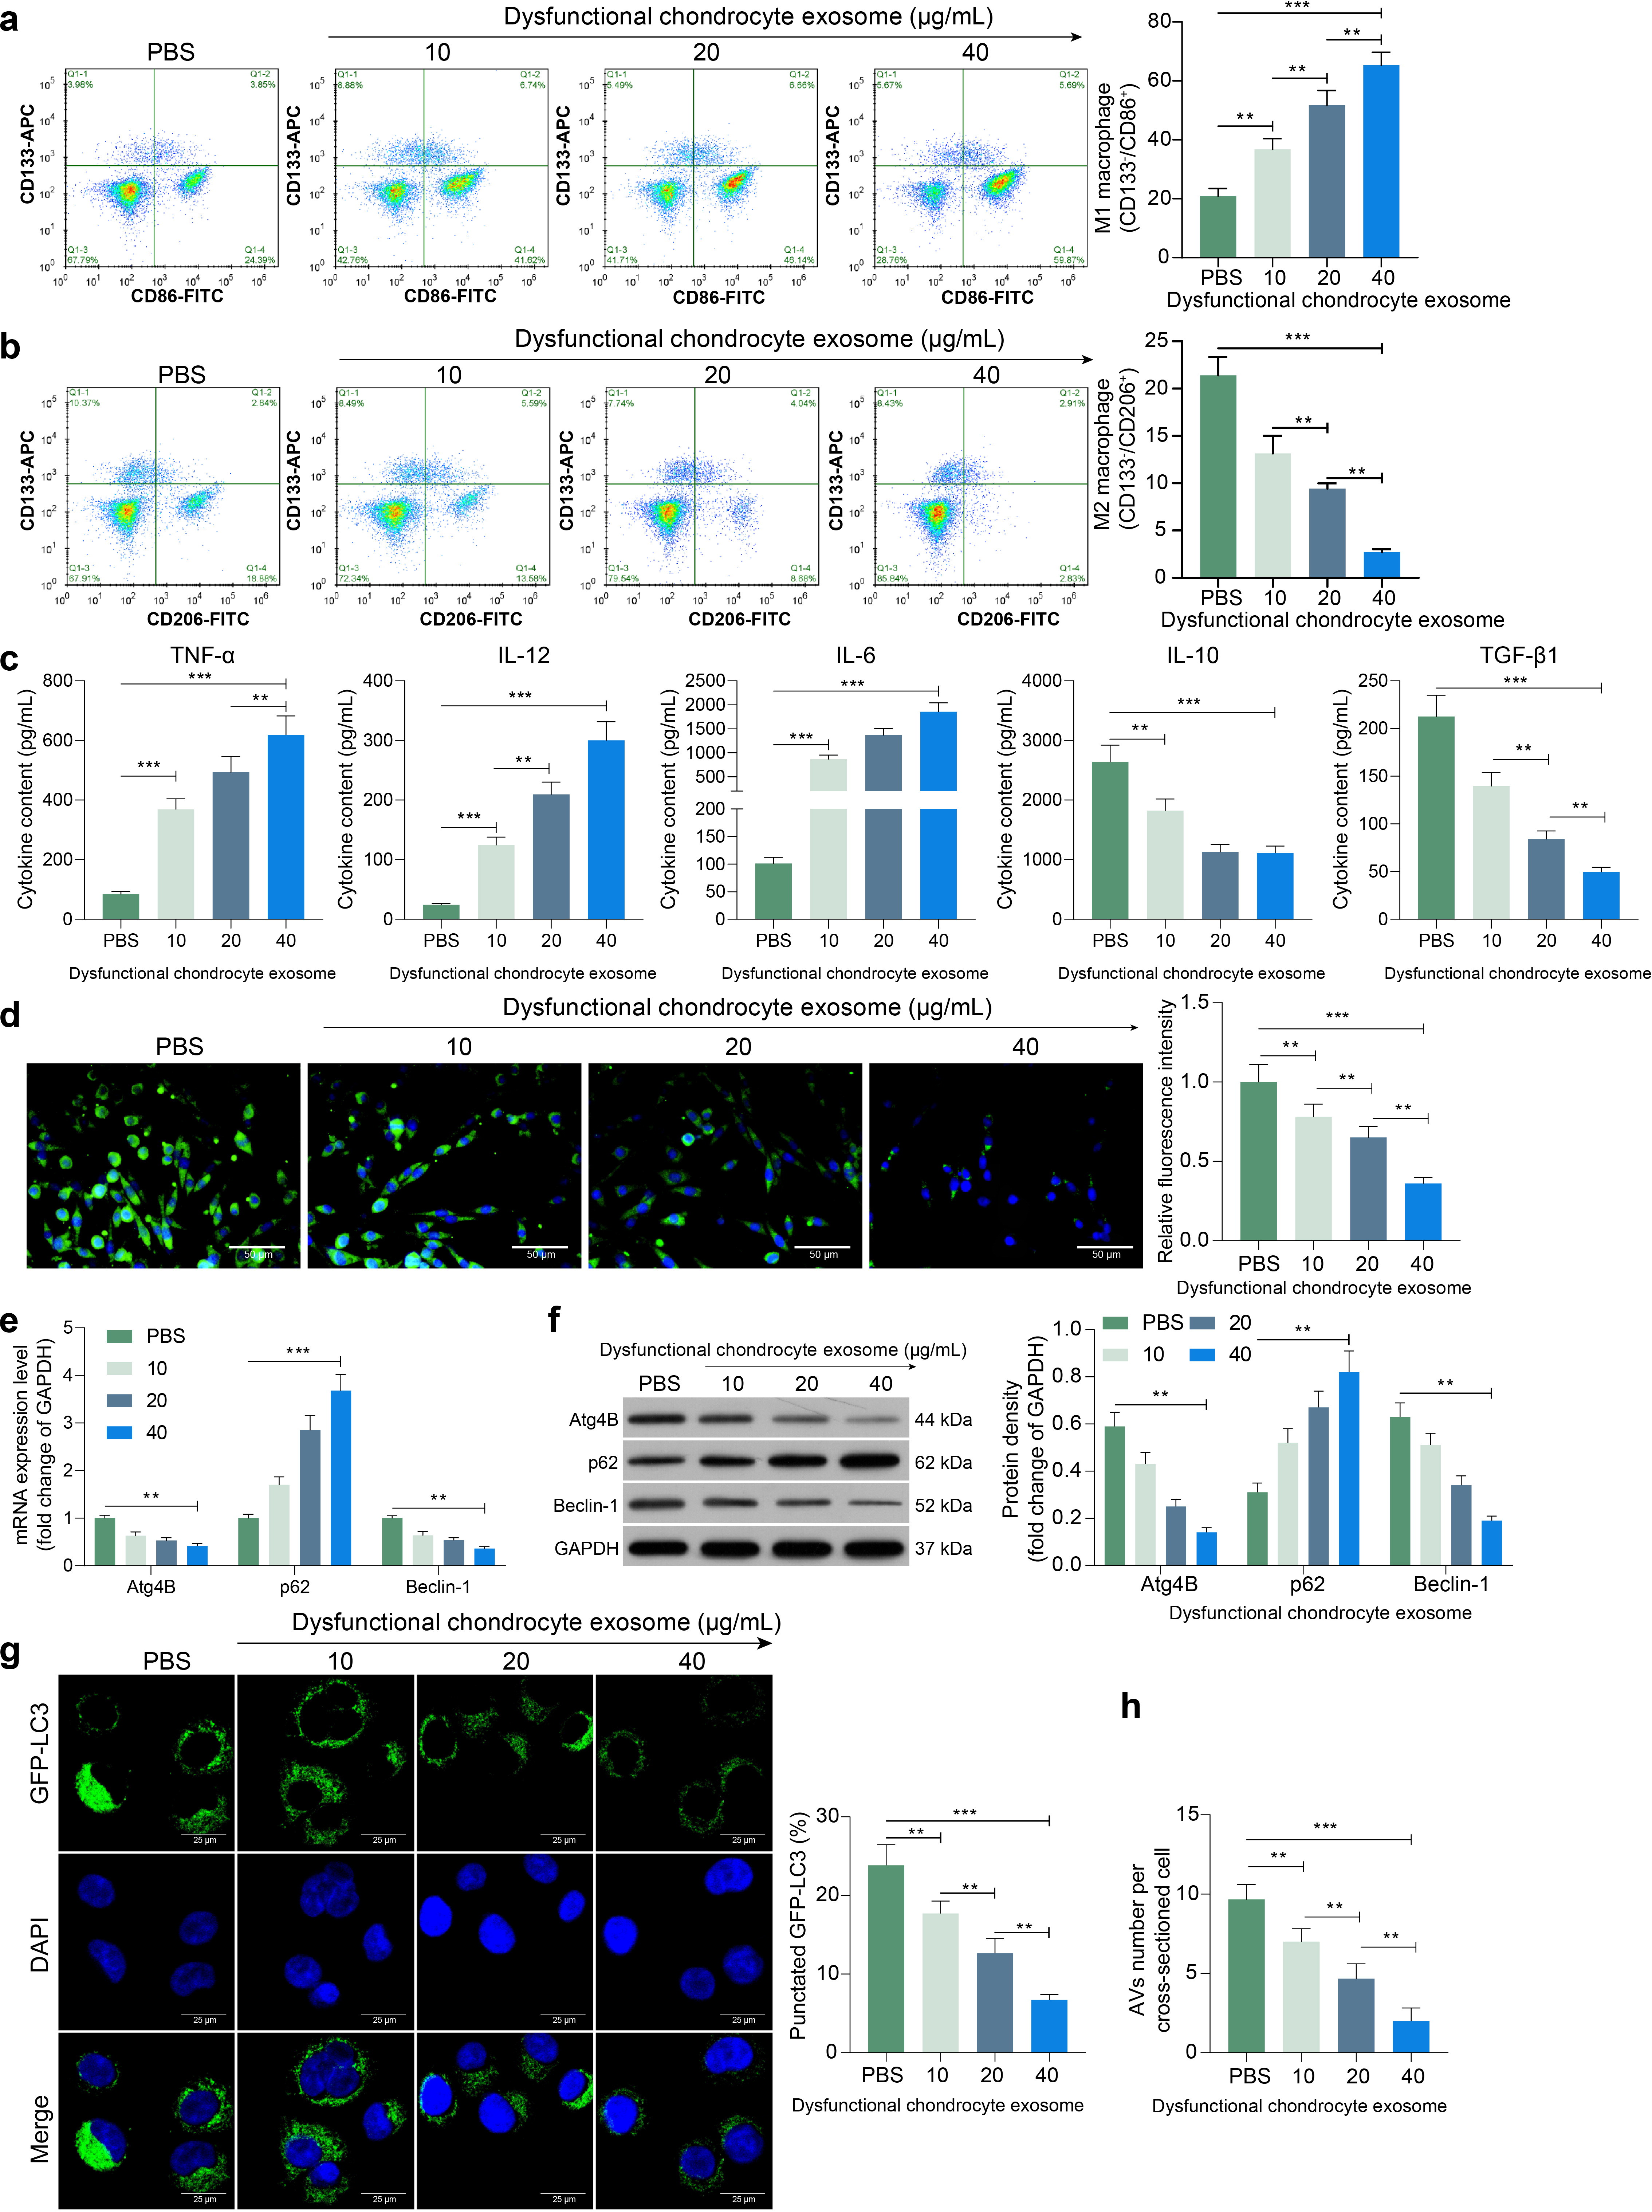 Exosomes from dysfunctional chondrocytes affect osteoarthritis in Sprague-Dawley rats through FTO-dependent regulation of PIK3R5 mRNA stability